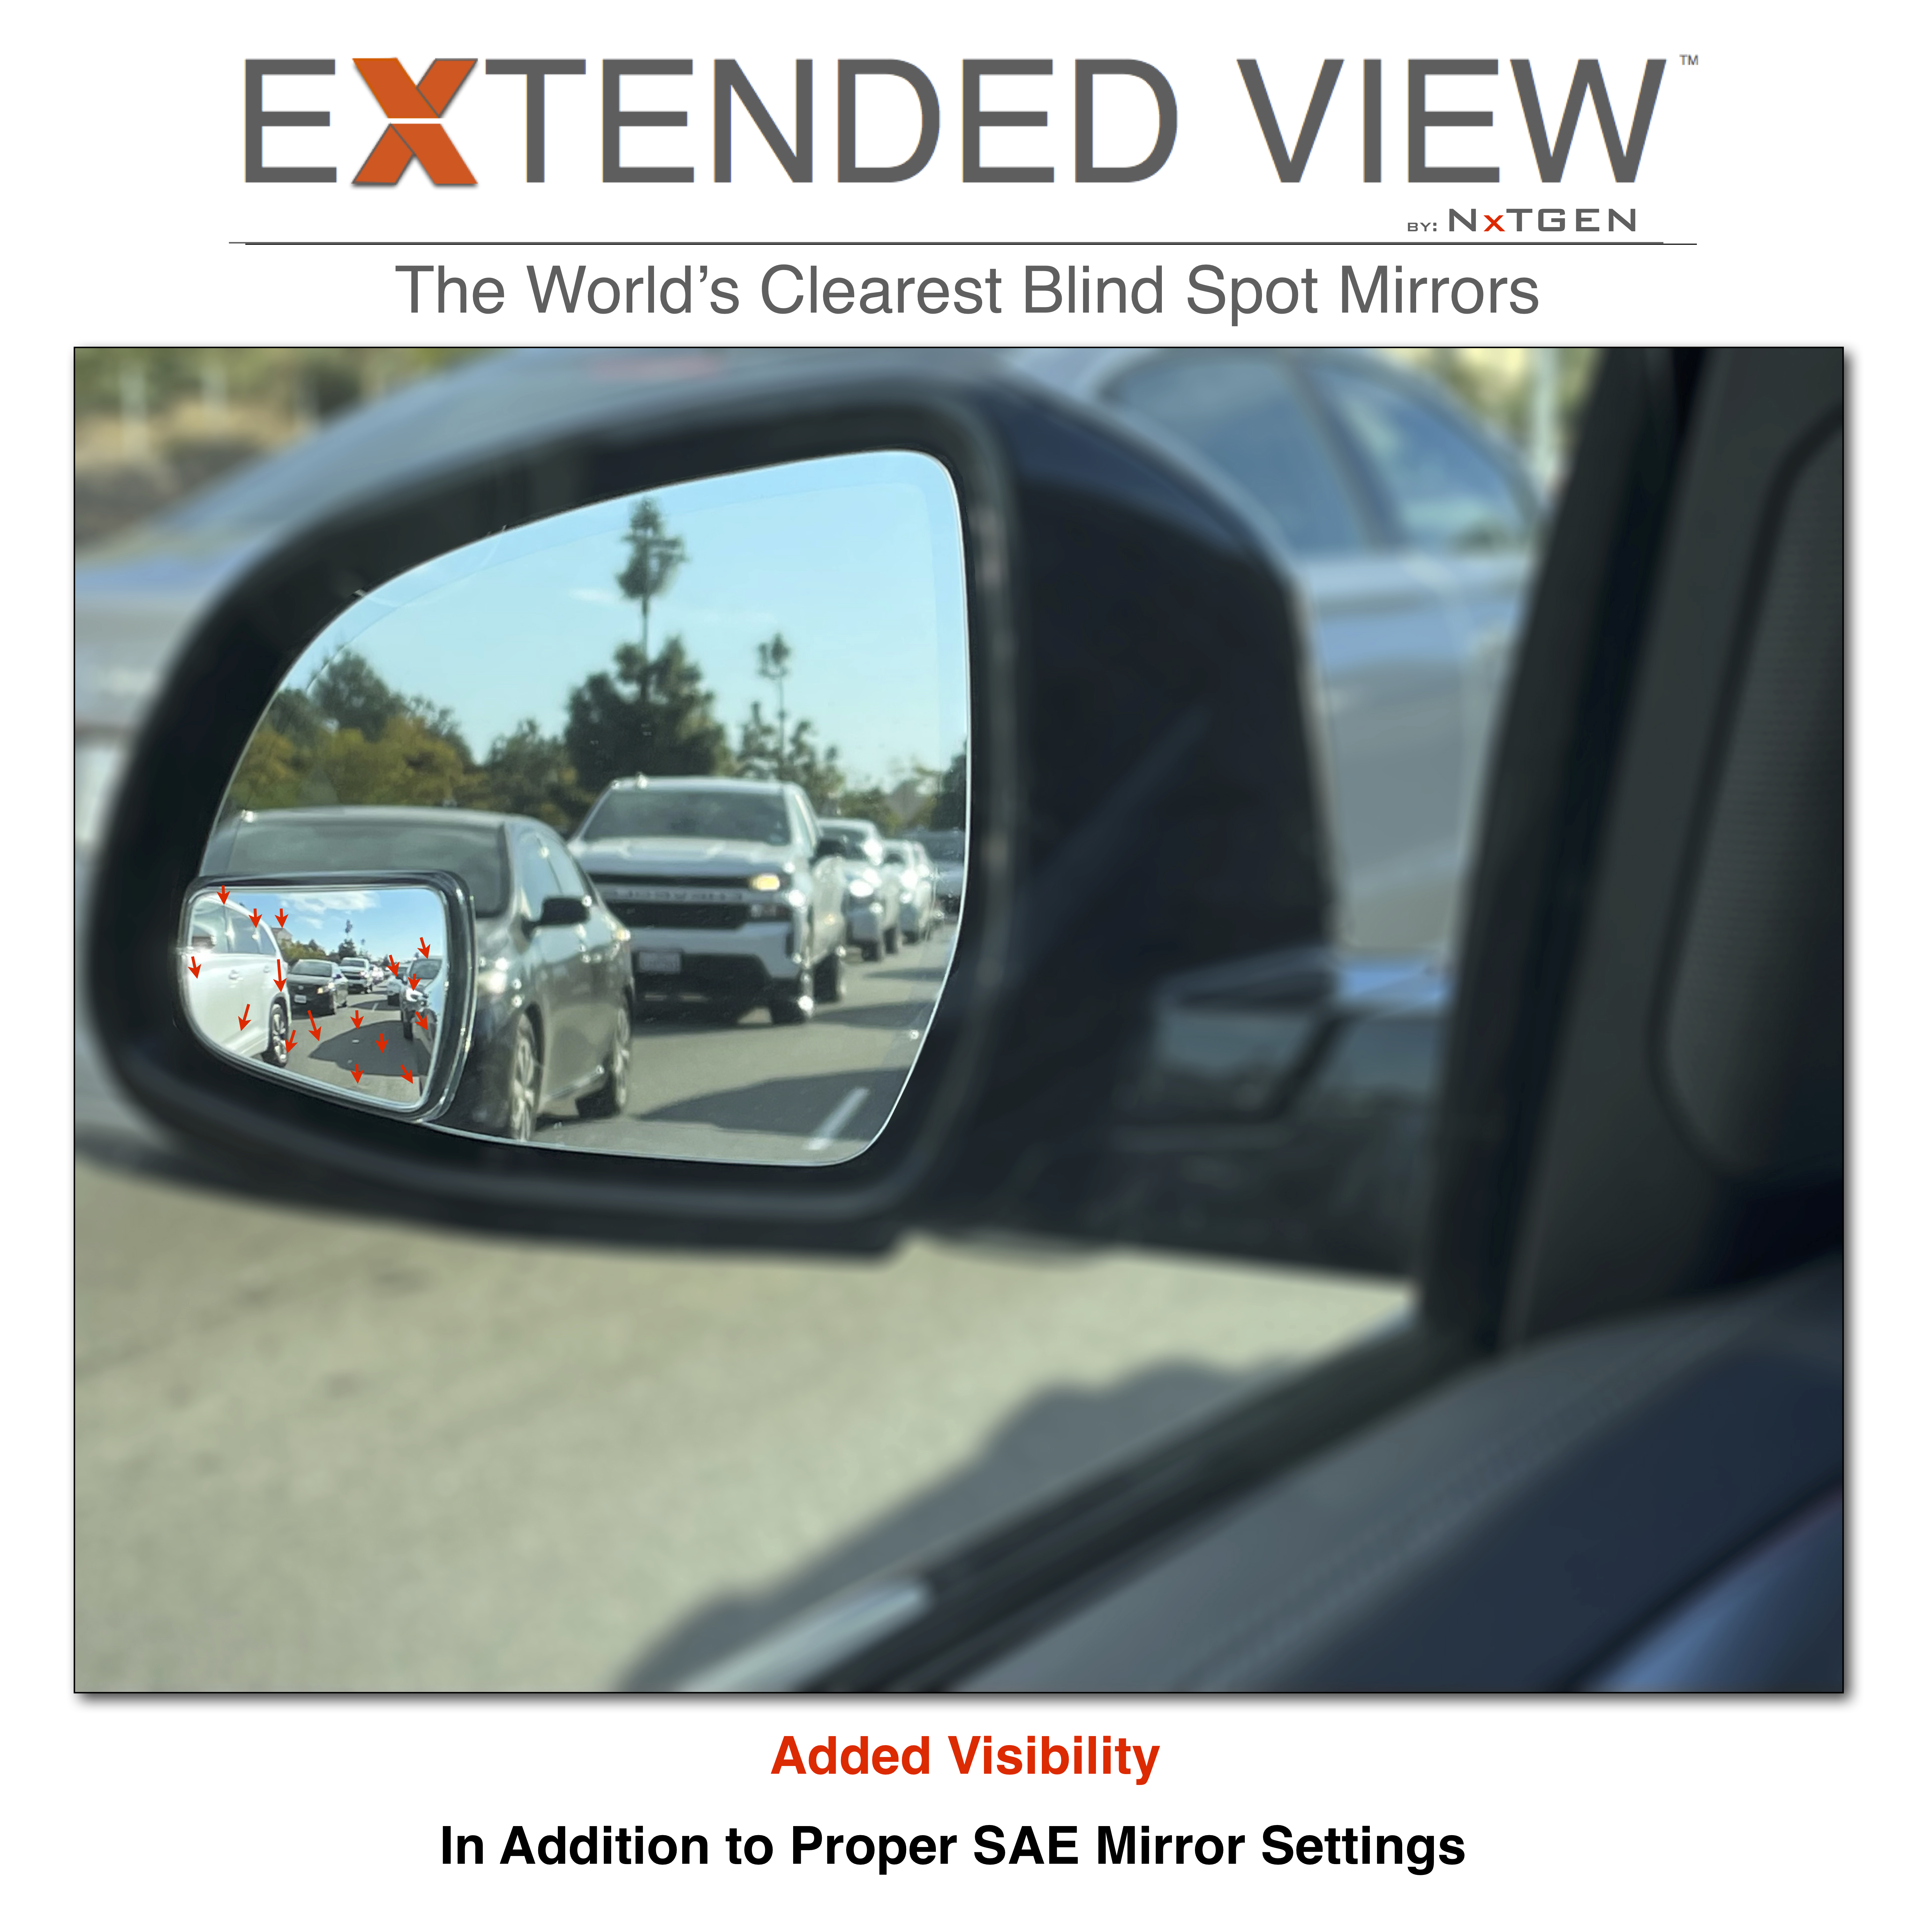 BMW X7 Blind Spot Mirrors | Extended View™